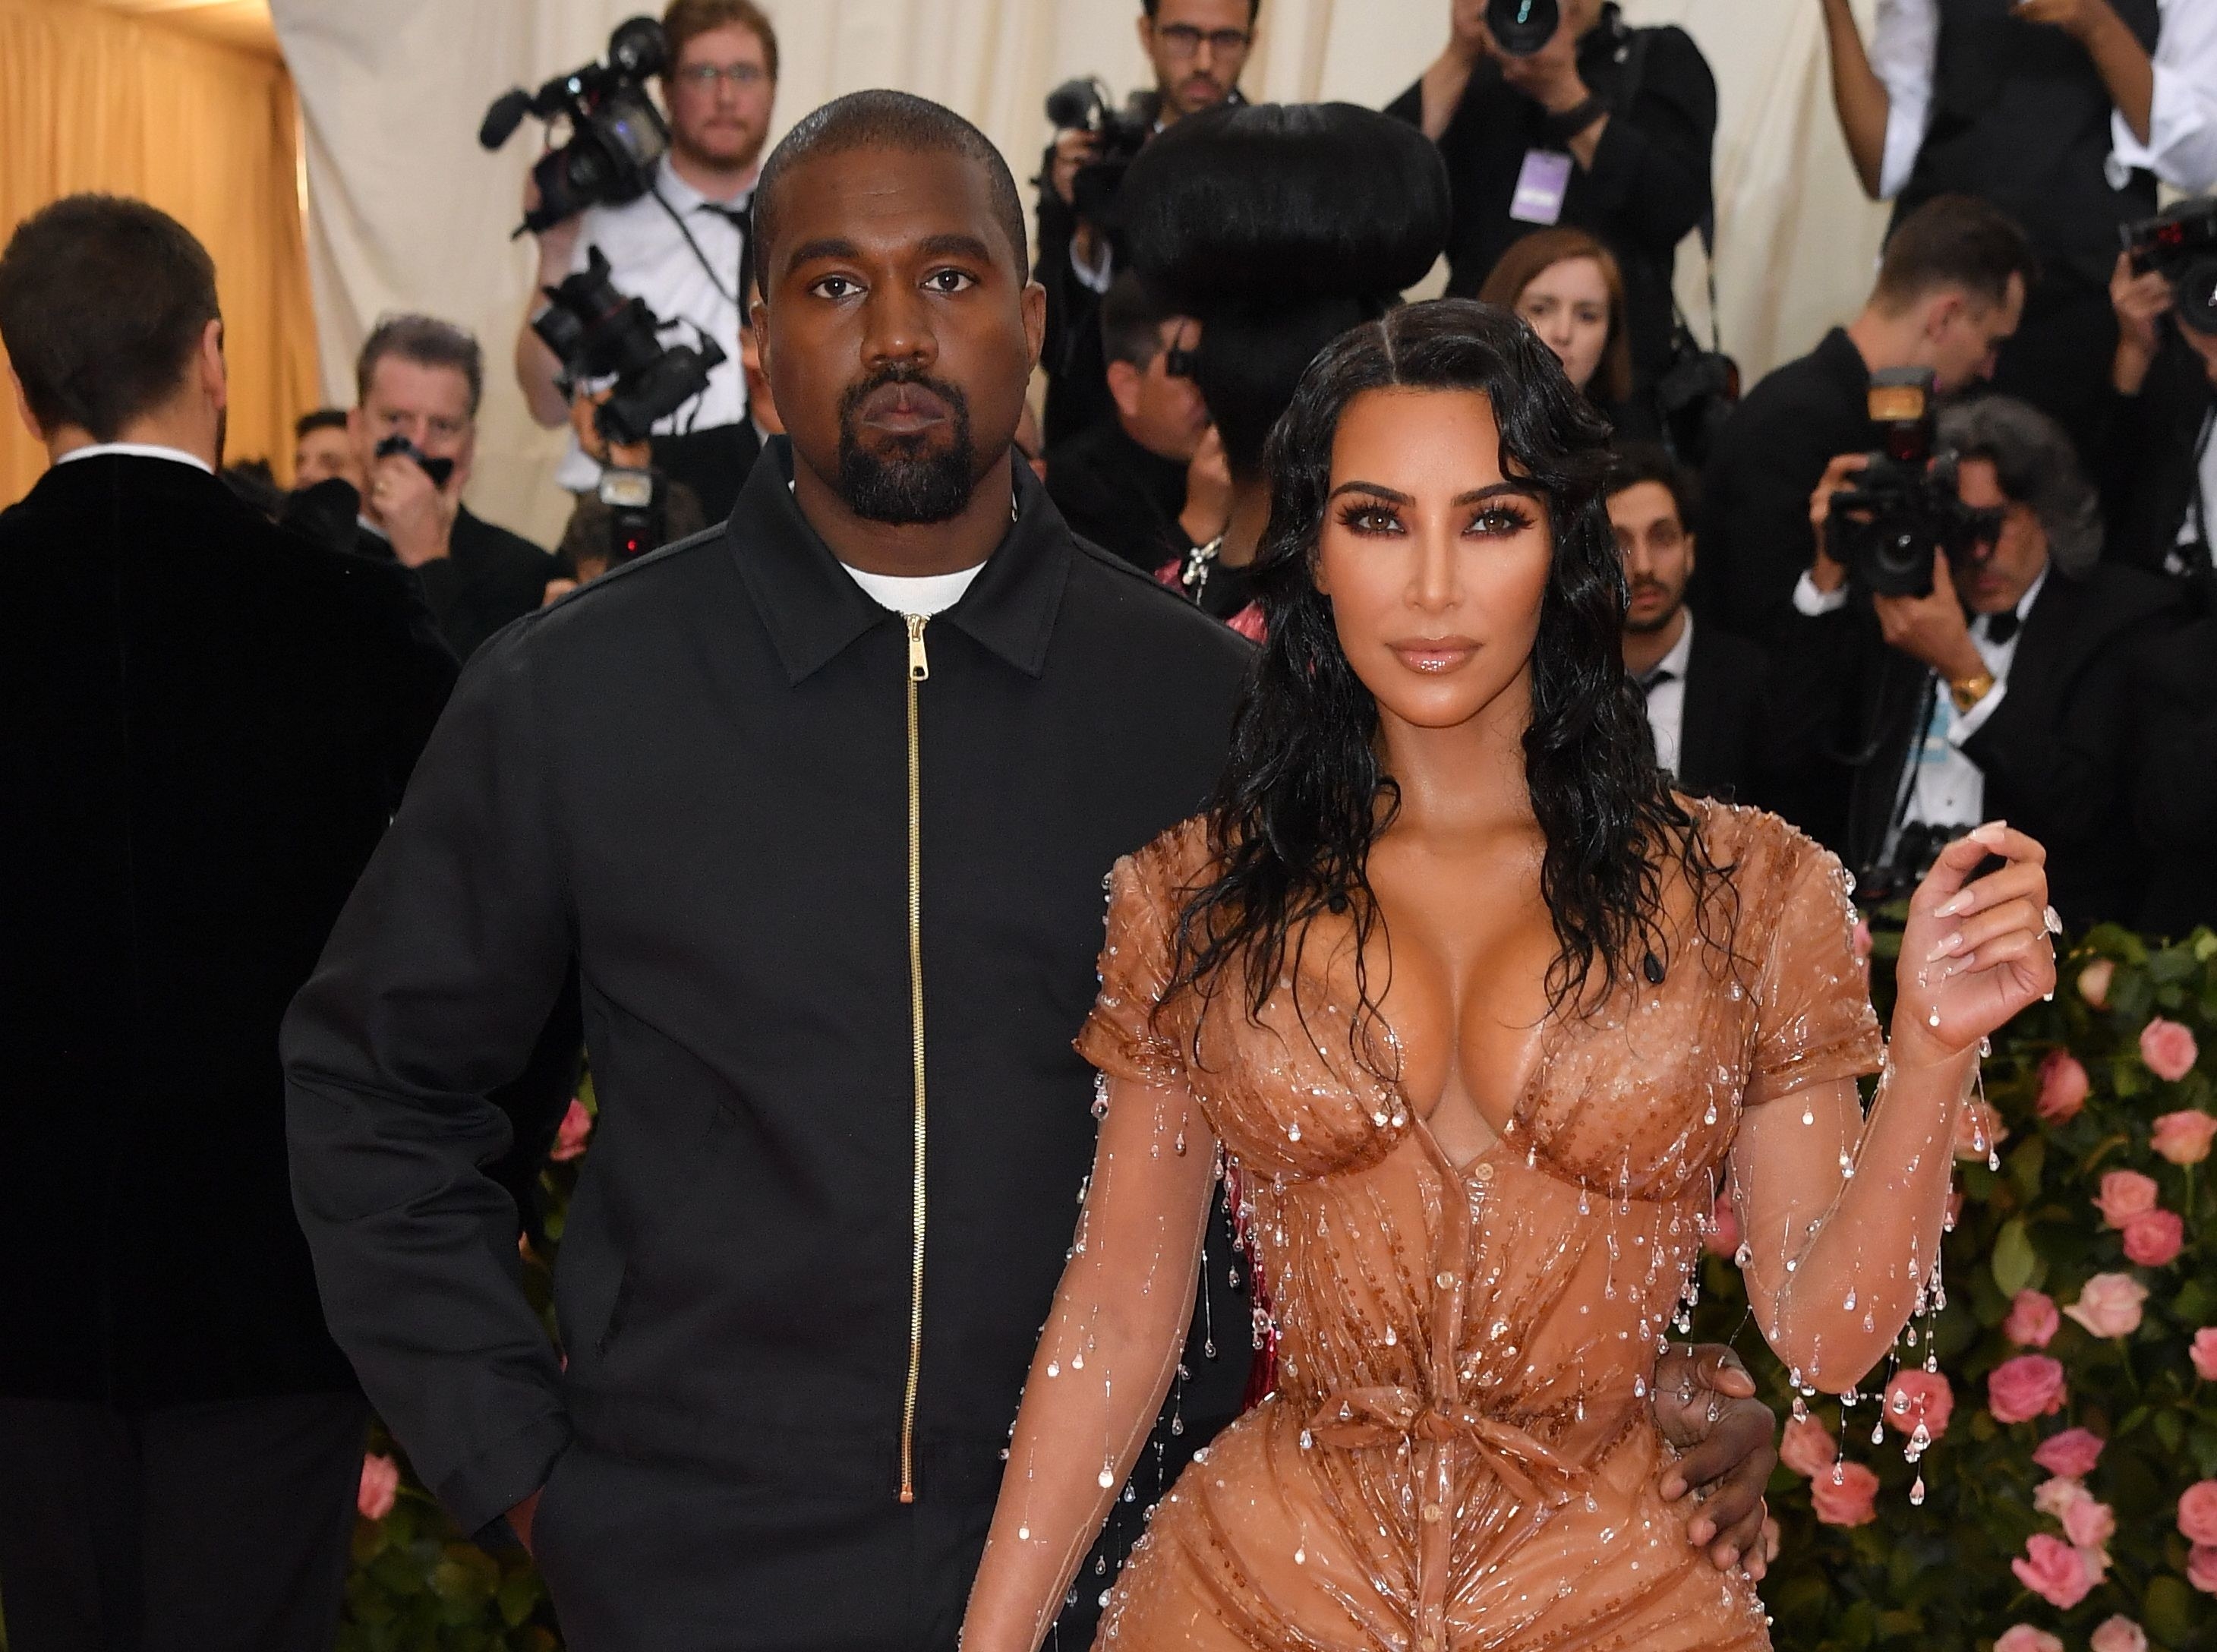 Kim Kardashian Says She Wouldn't Have a Career Without Paris